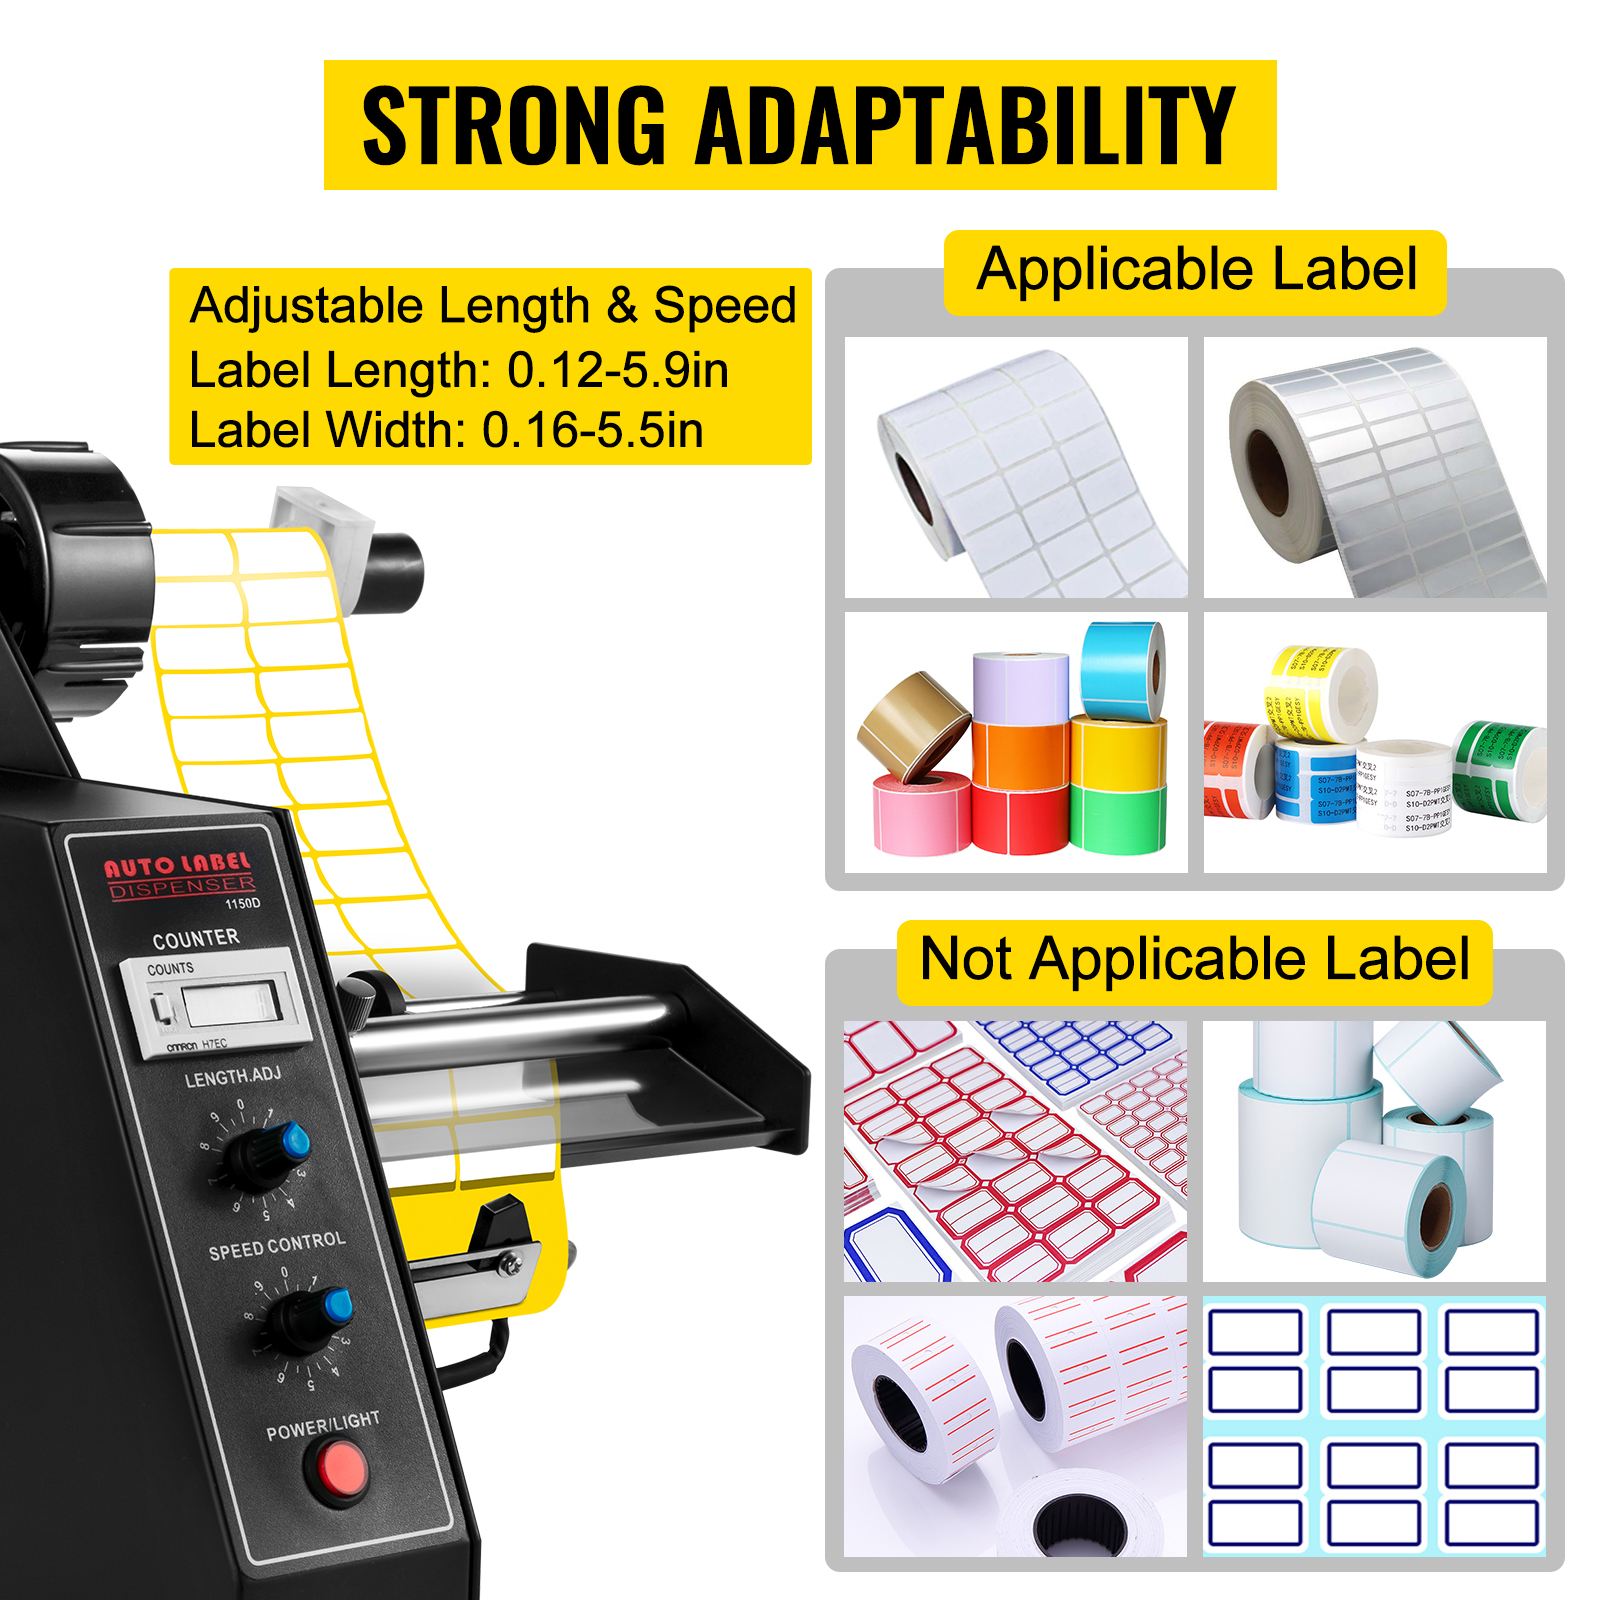 Solid Automatic Label Dispenser Machine Stripper Separating Machine Speed Control 3-10 m/min Protect Function Fast Motor U.S 